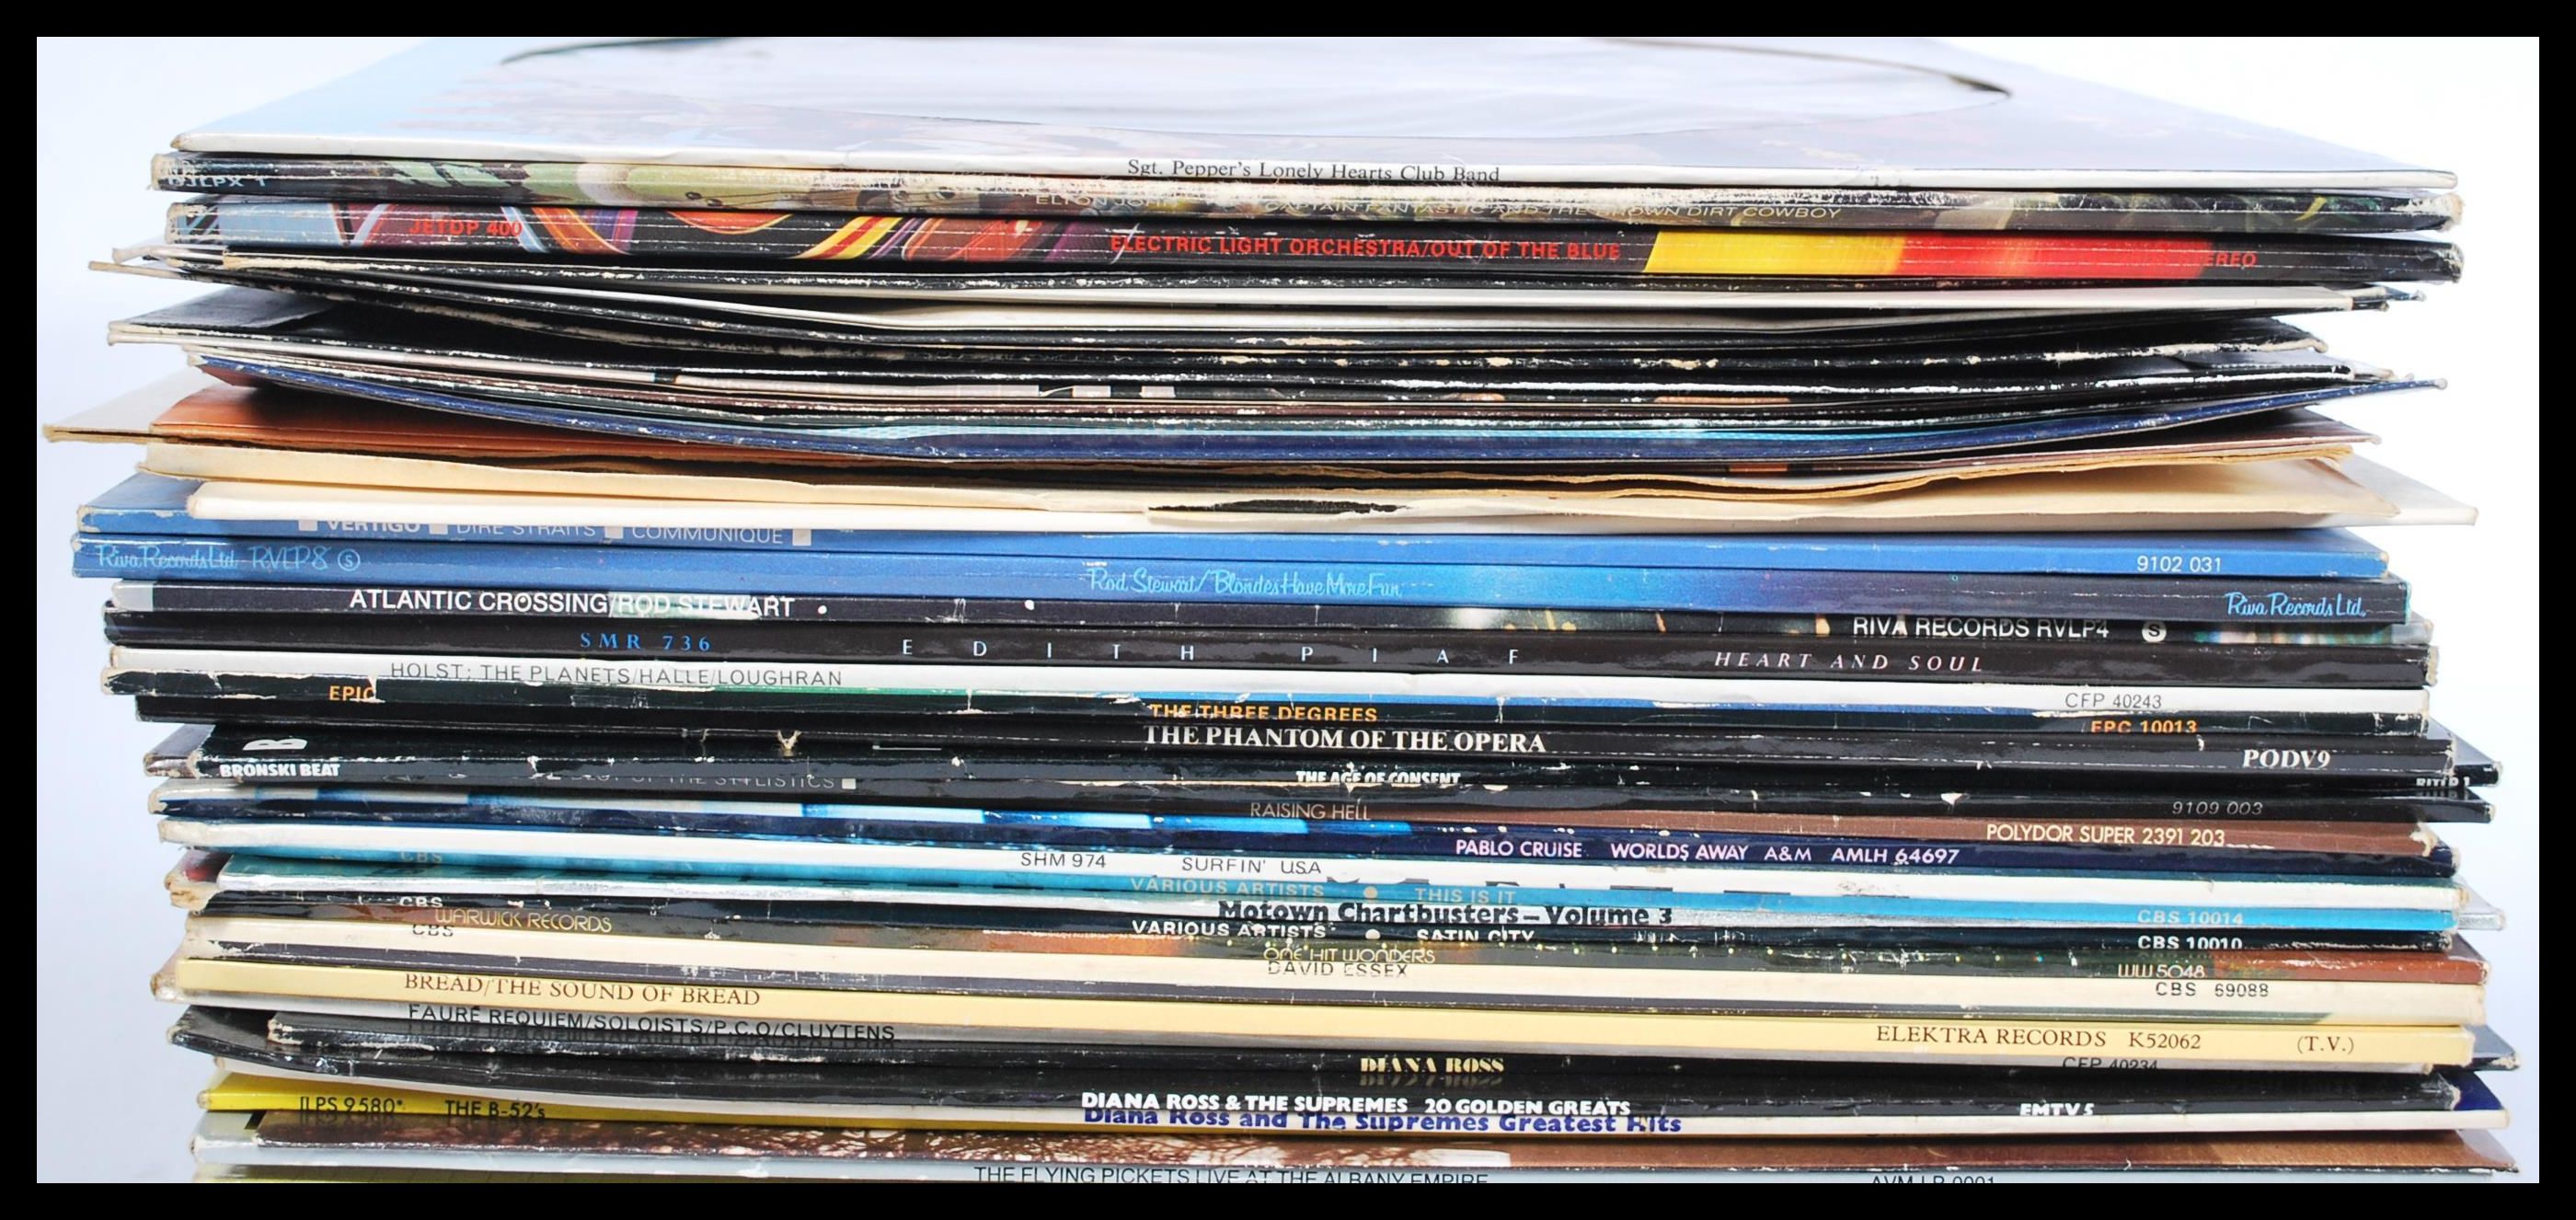 Vinyl Records - A collection of vinyl long play LP and 12" singles featuring various artists to - Image 3 of 4